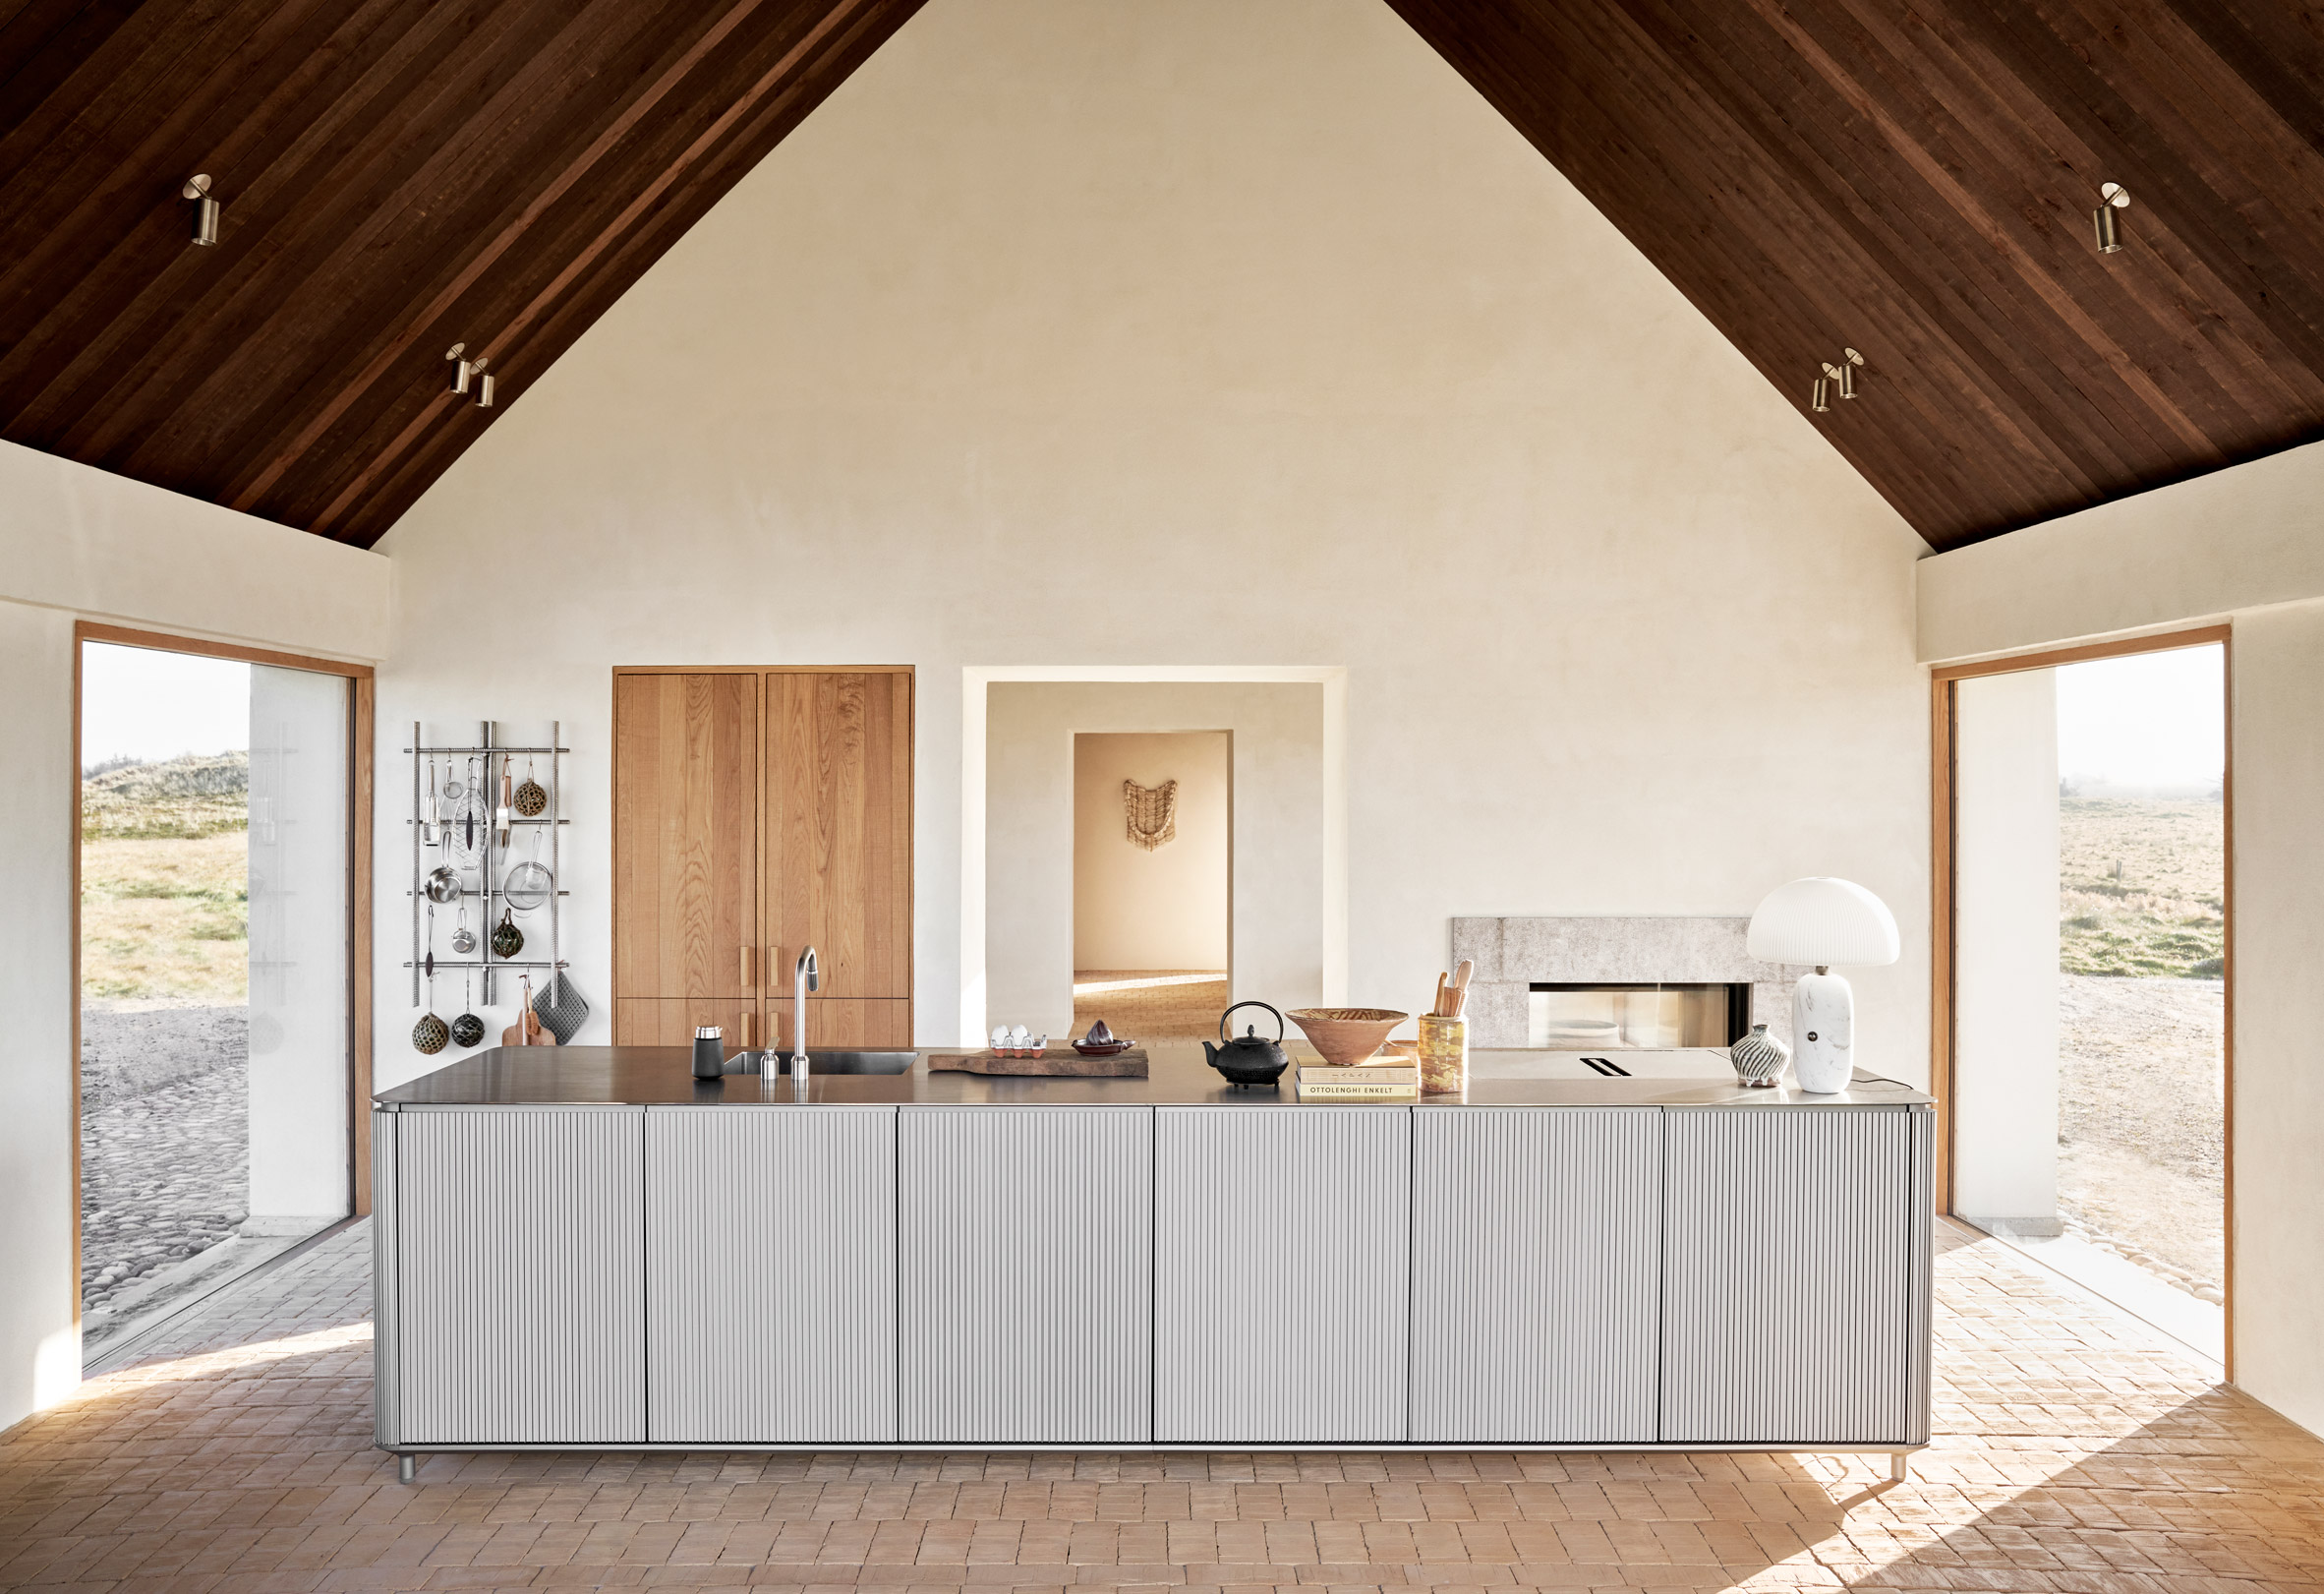 Kitchen and communal space guesthouse by Hahn Lavsen in Denmark